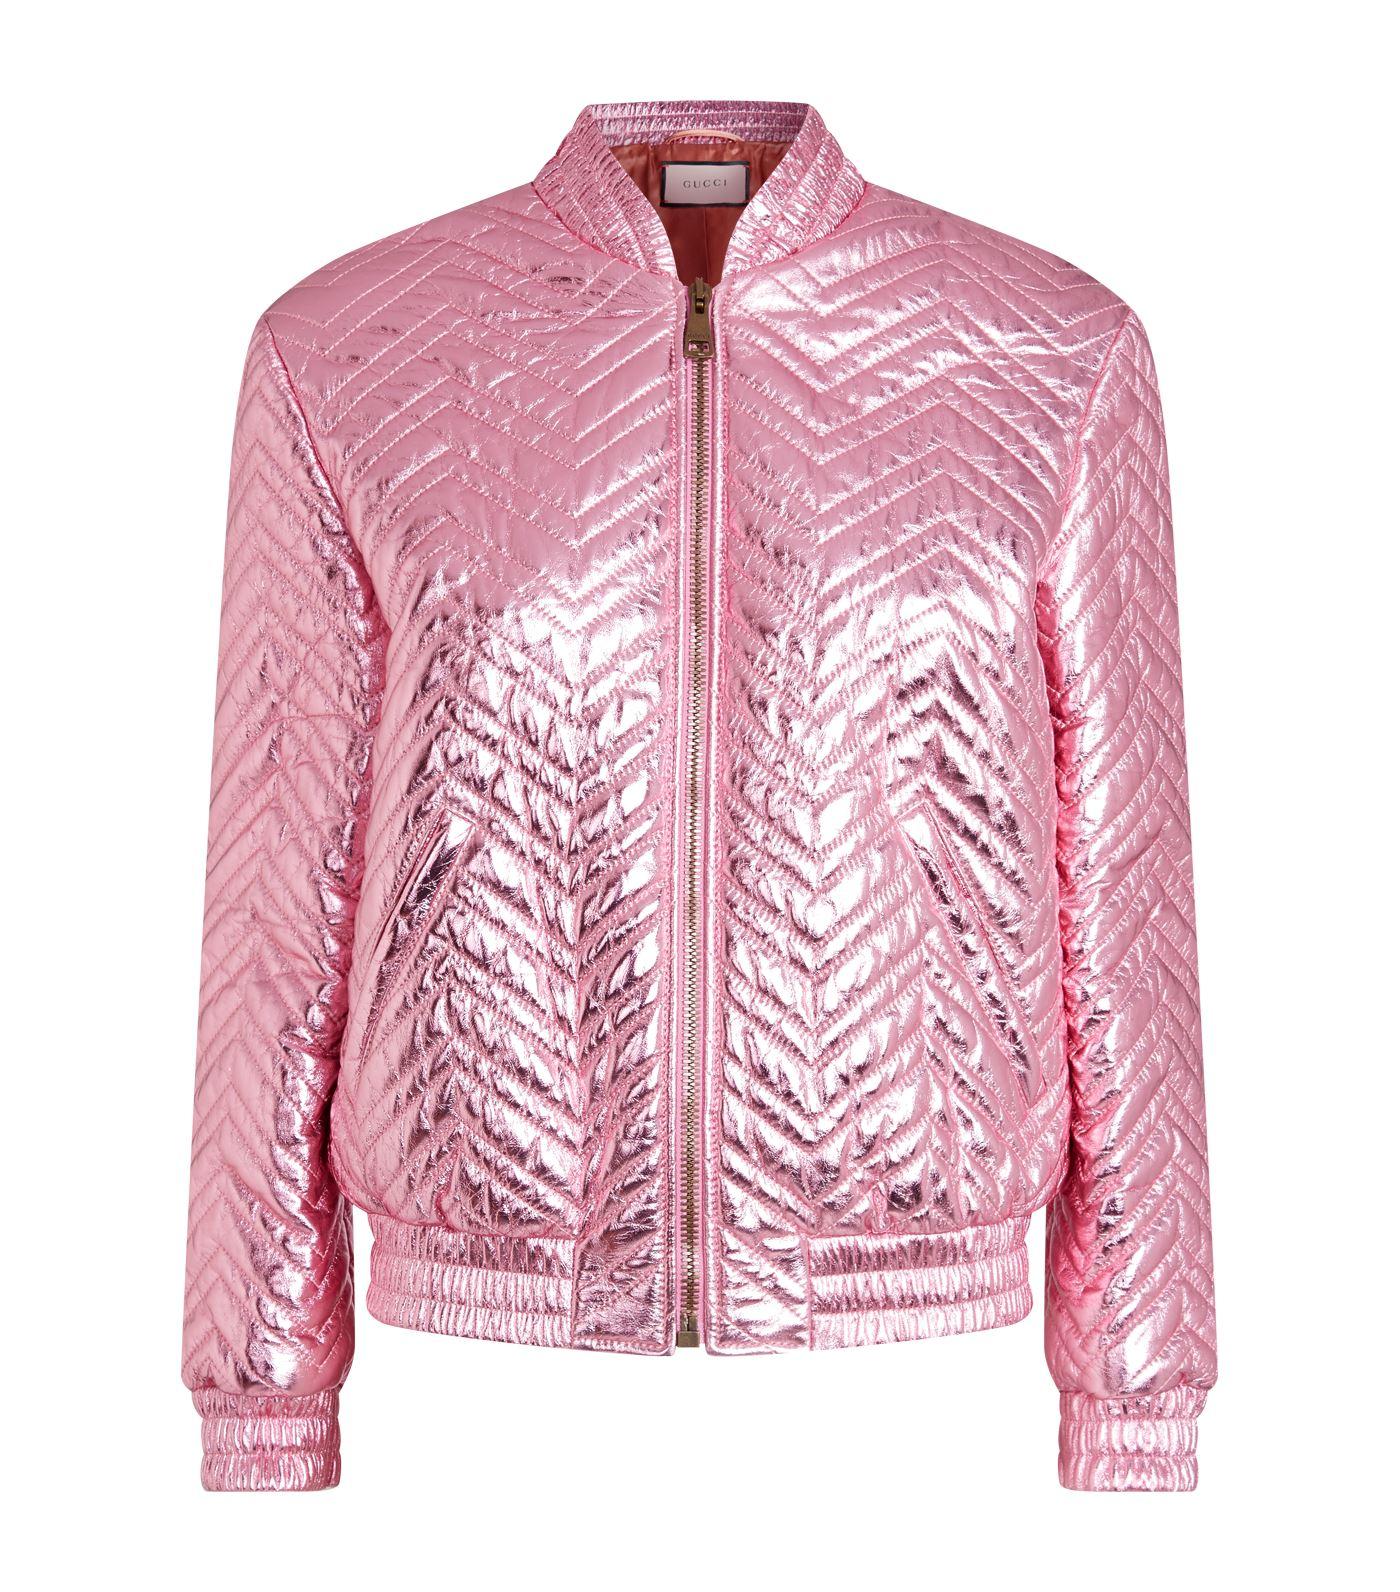 Gucci Metallic Leather Bomber Jacket in Pink | Lyst Canada